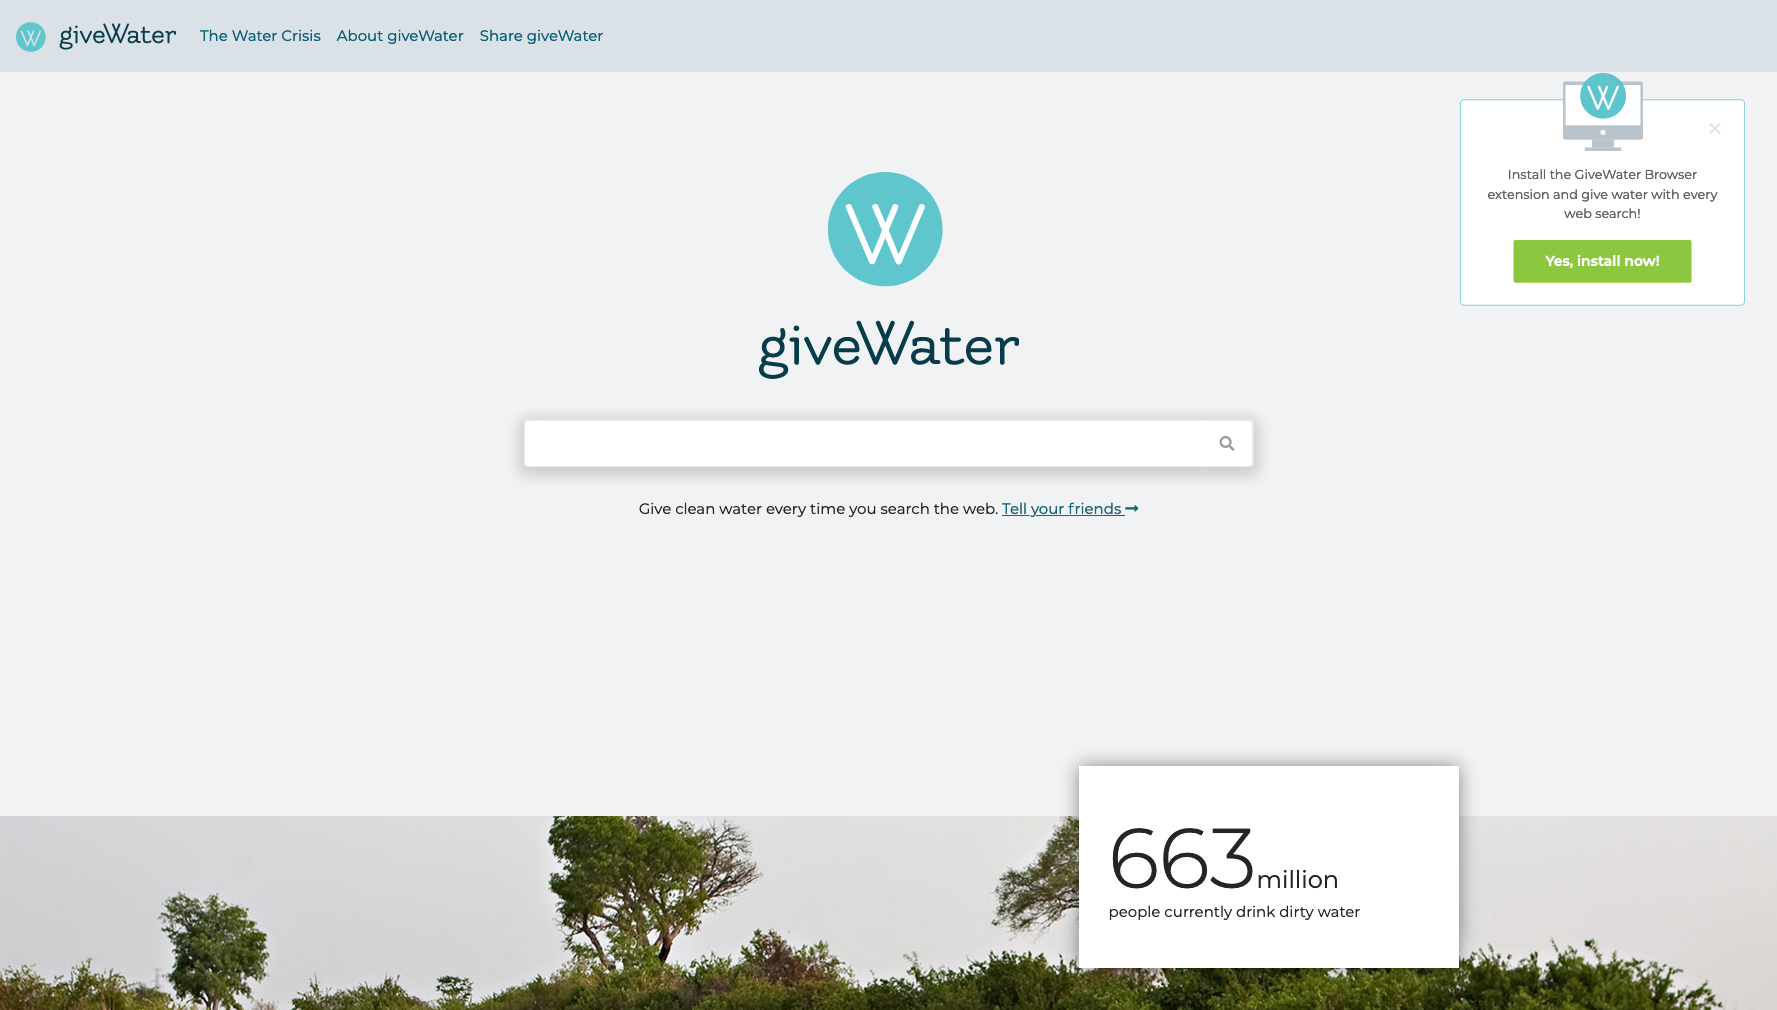 givewater search engine website